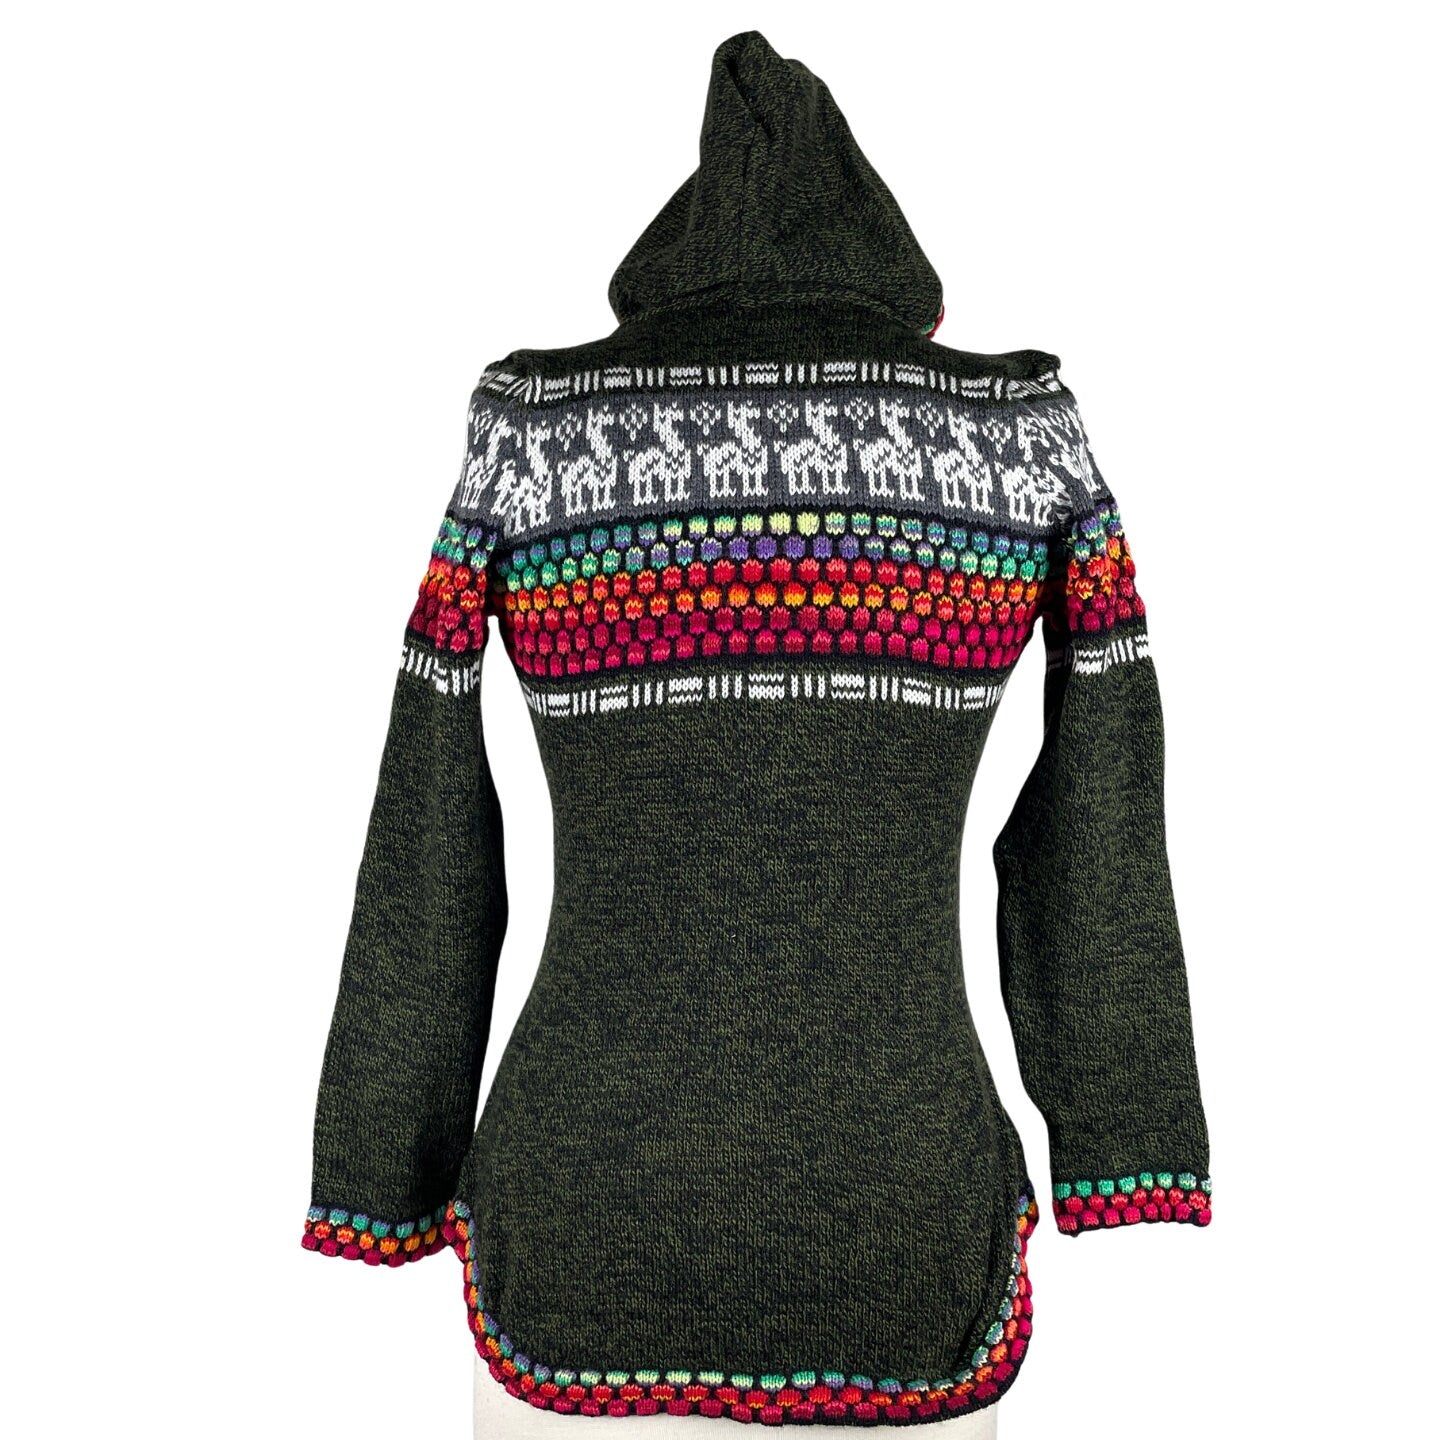 Soft Hooded Alpaca Sweater | Olive Colorful